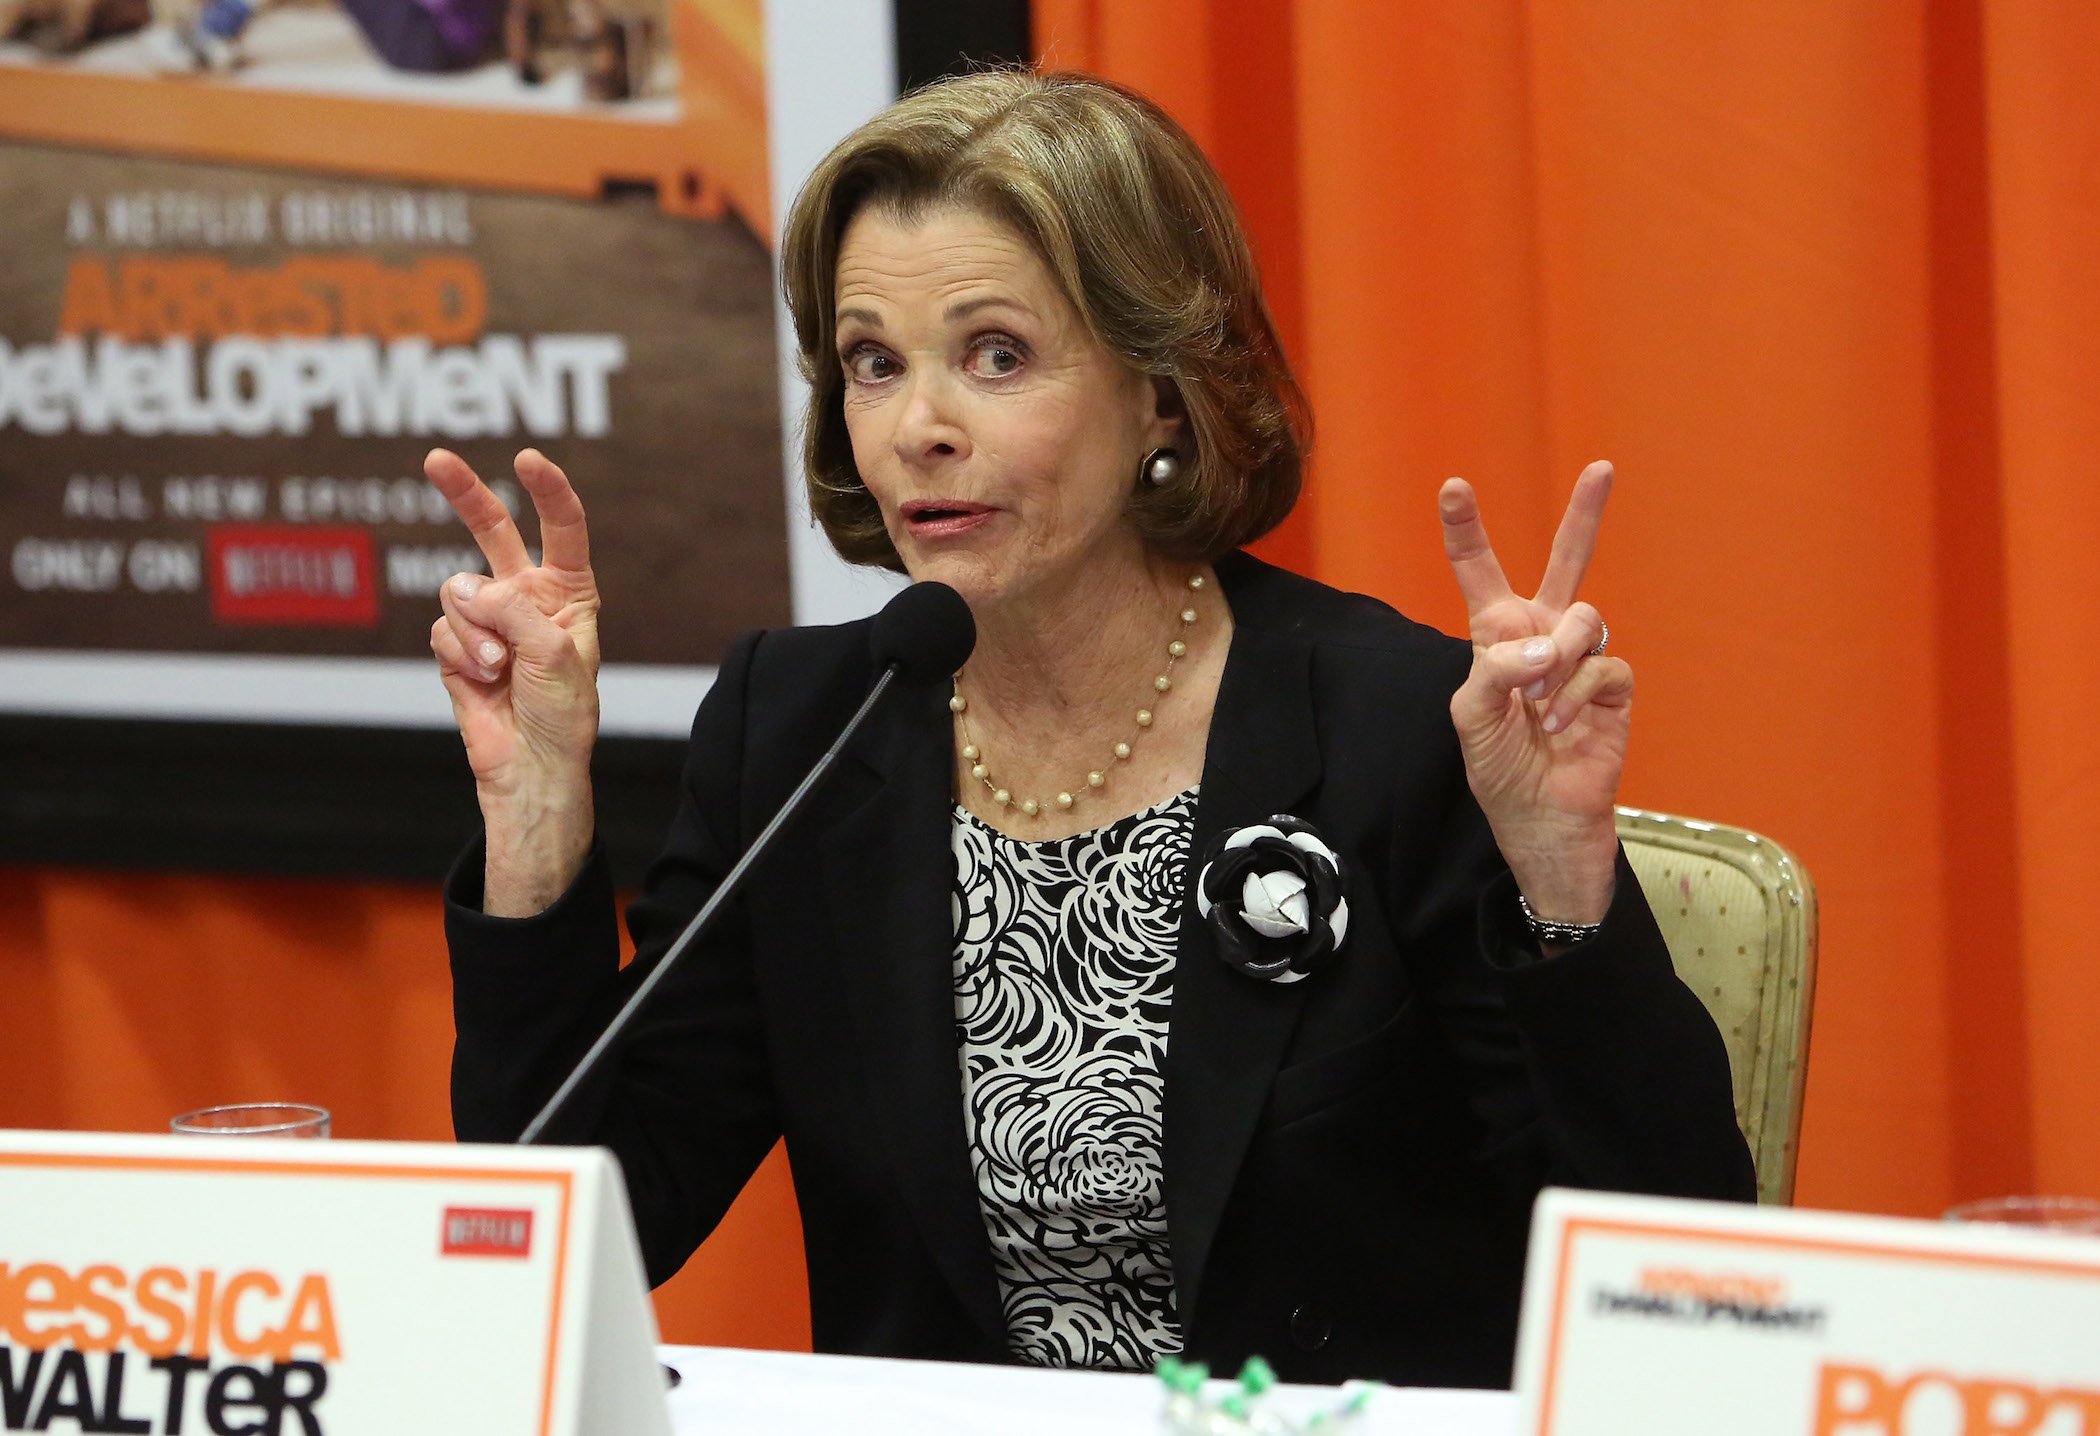 Jessica Walter from 'Arrested Development' speaking at a press conference with both hands up making air quotes